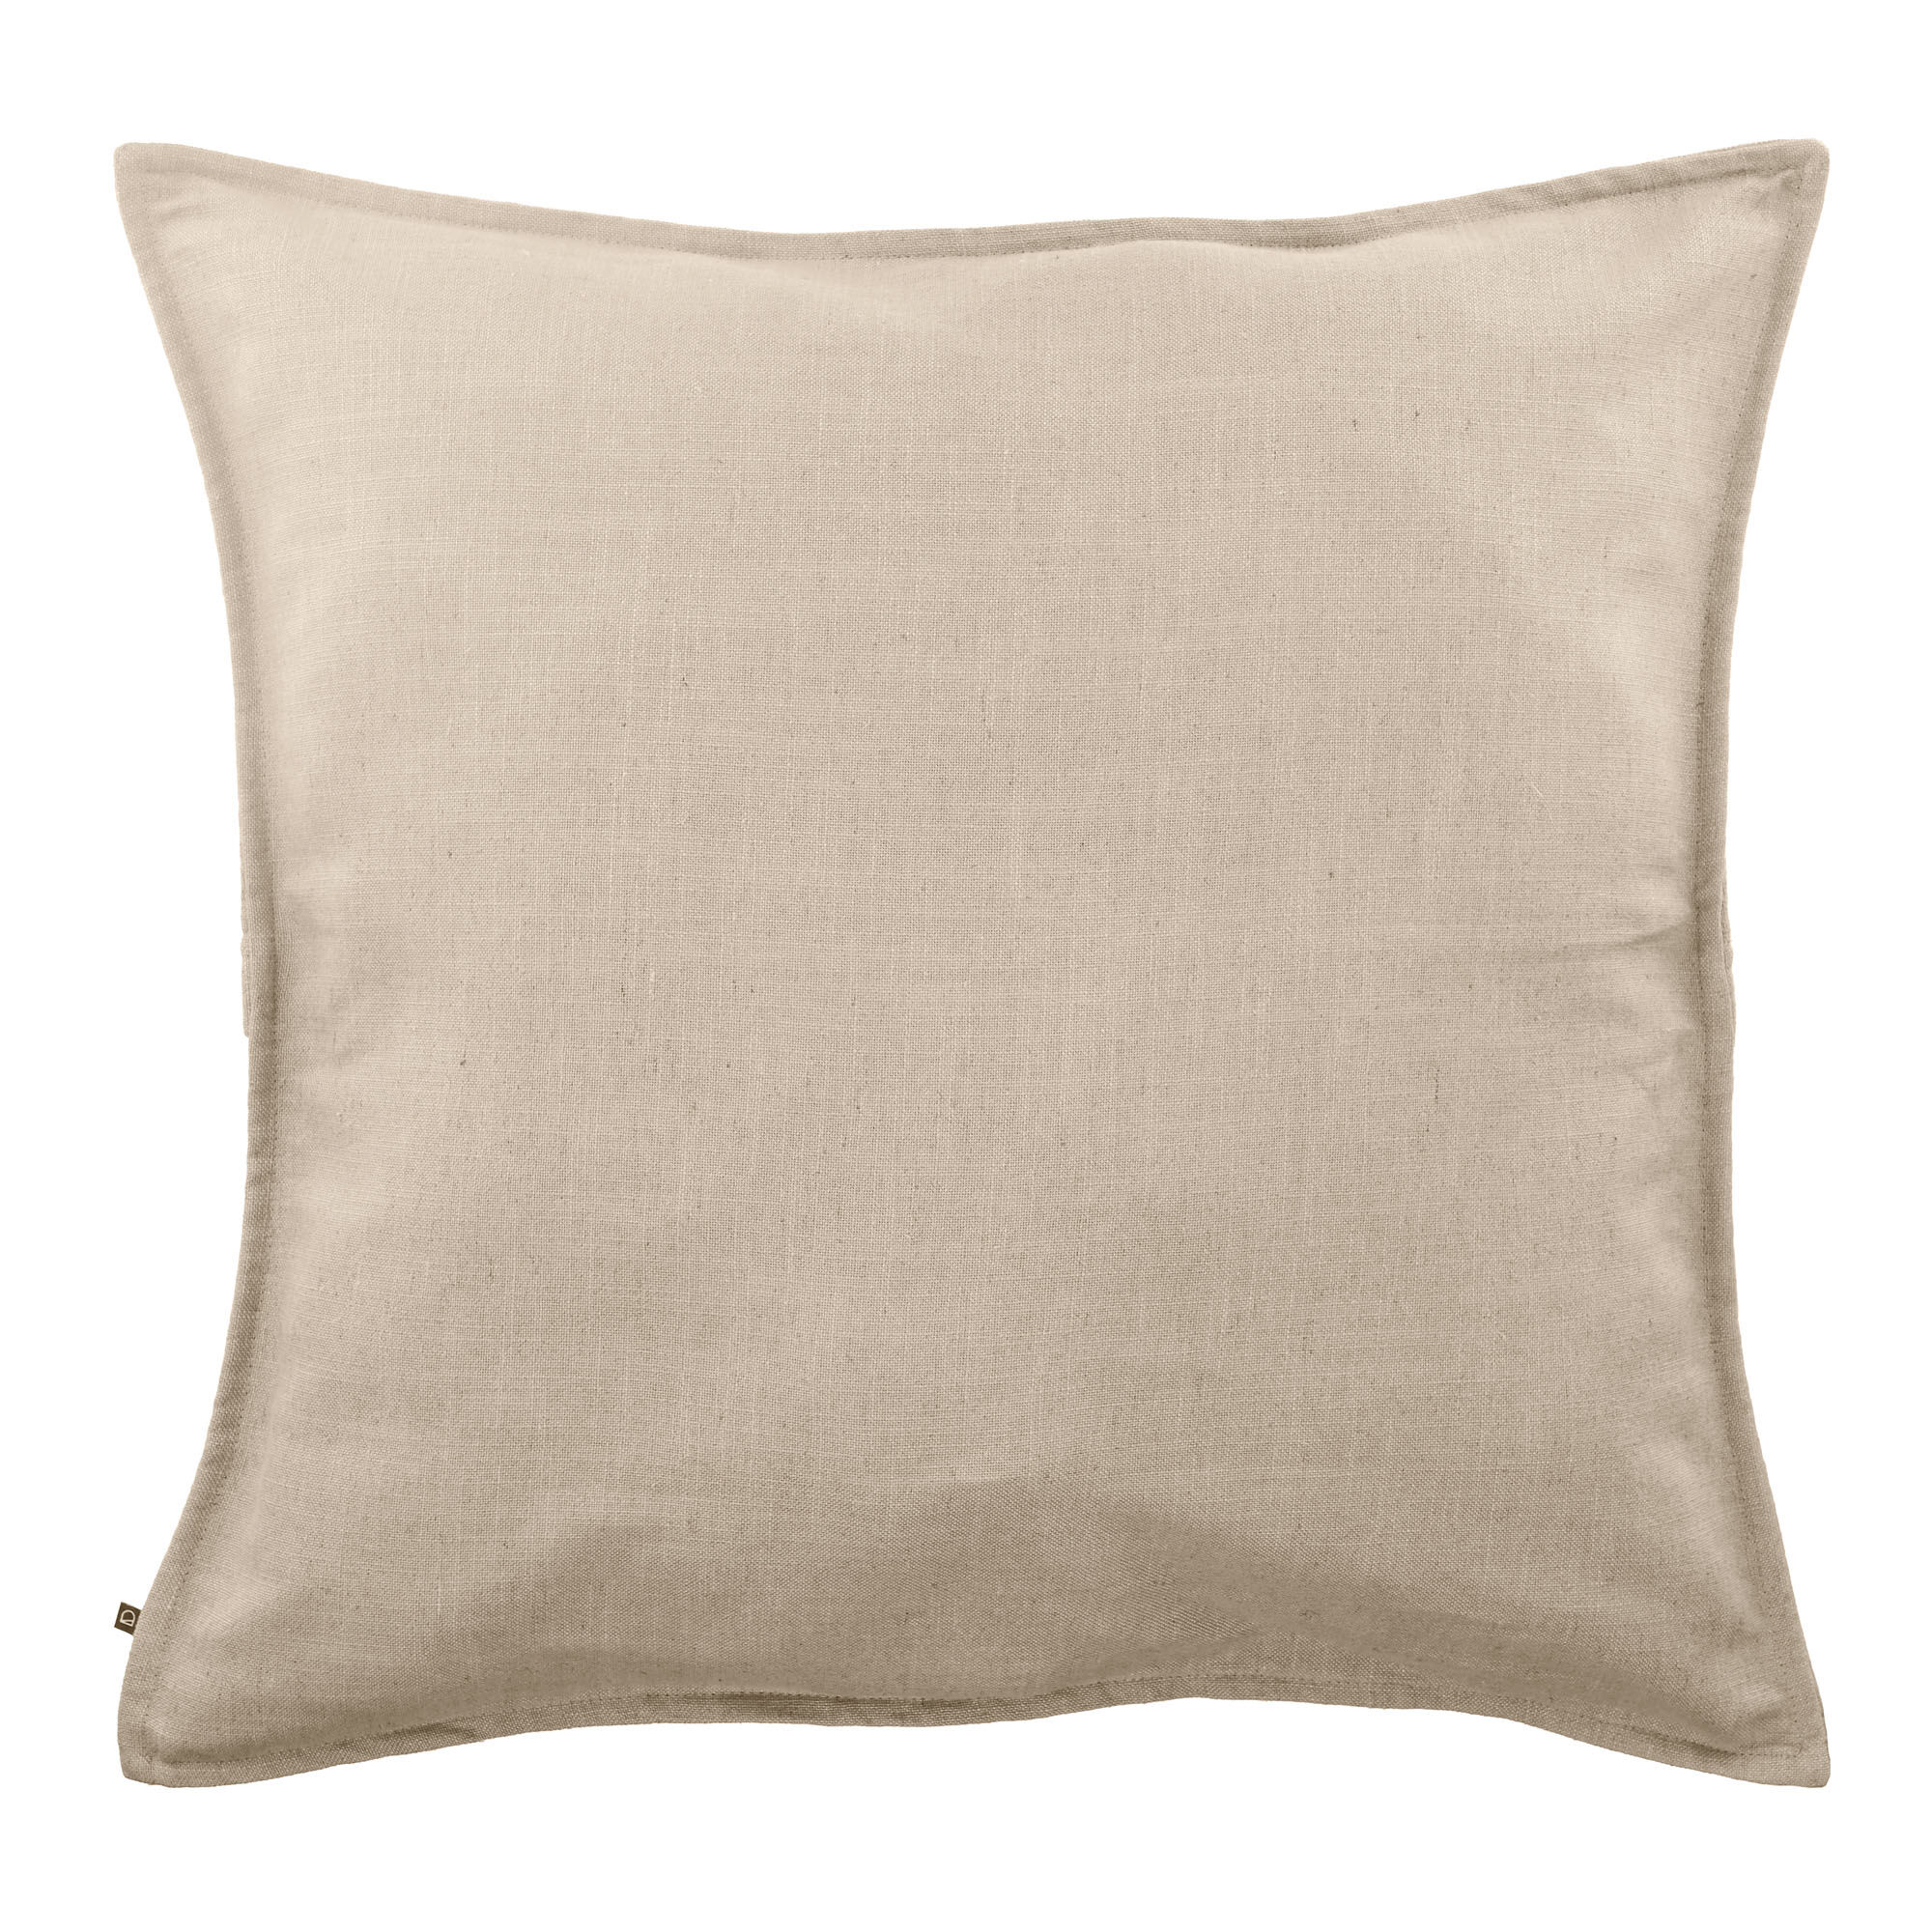 Kave Home Blok linen cushion cover in beige, 60 x 60 cm